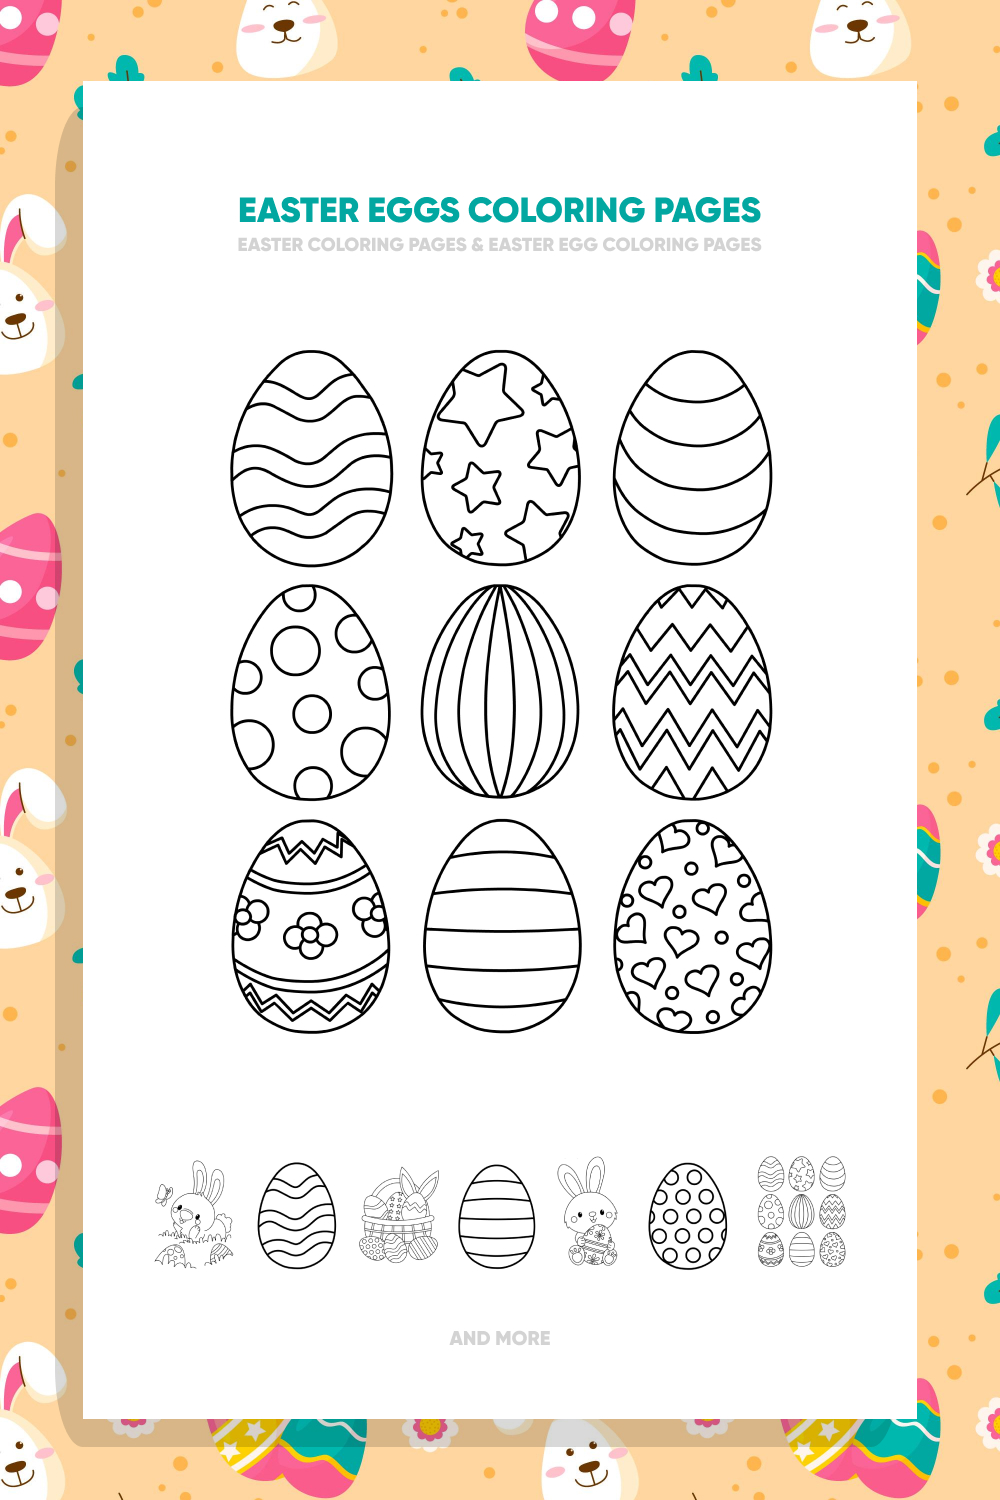 Easter Eggs Coloring Pages pinterest.